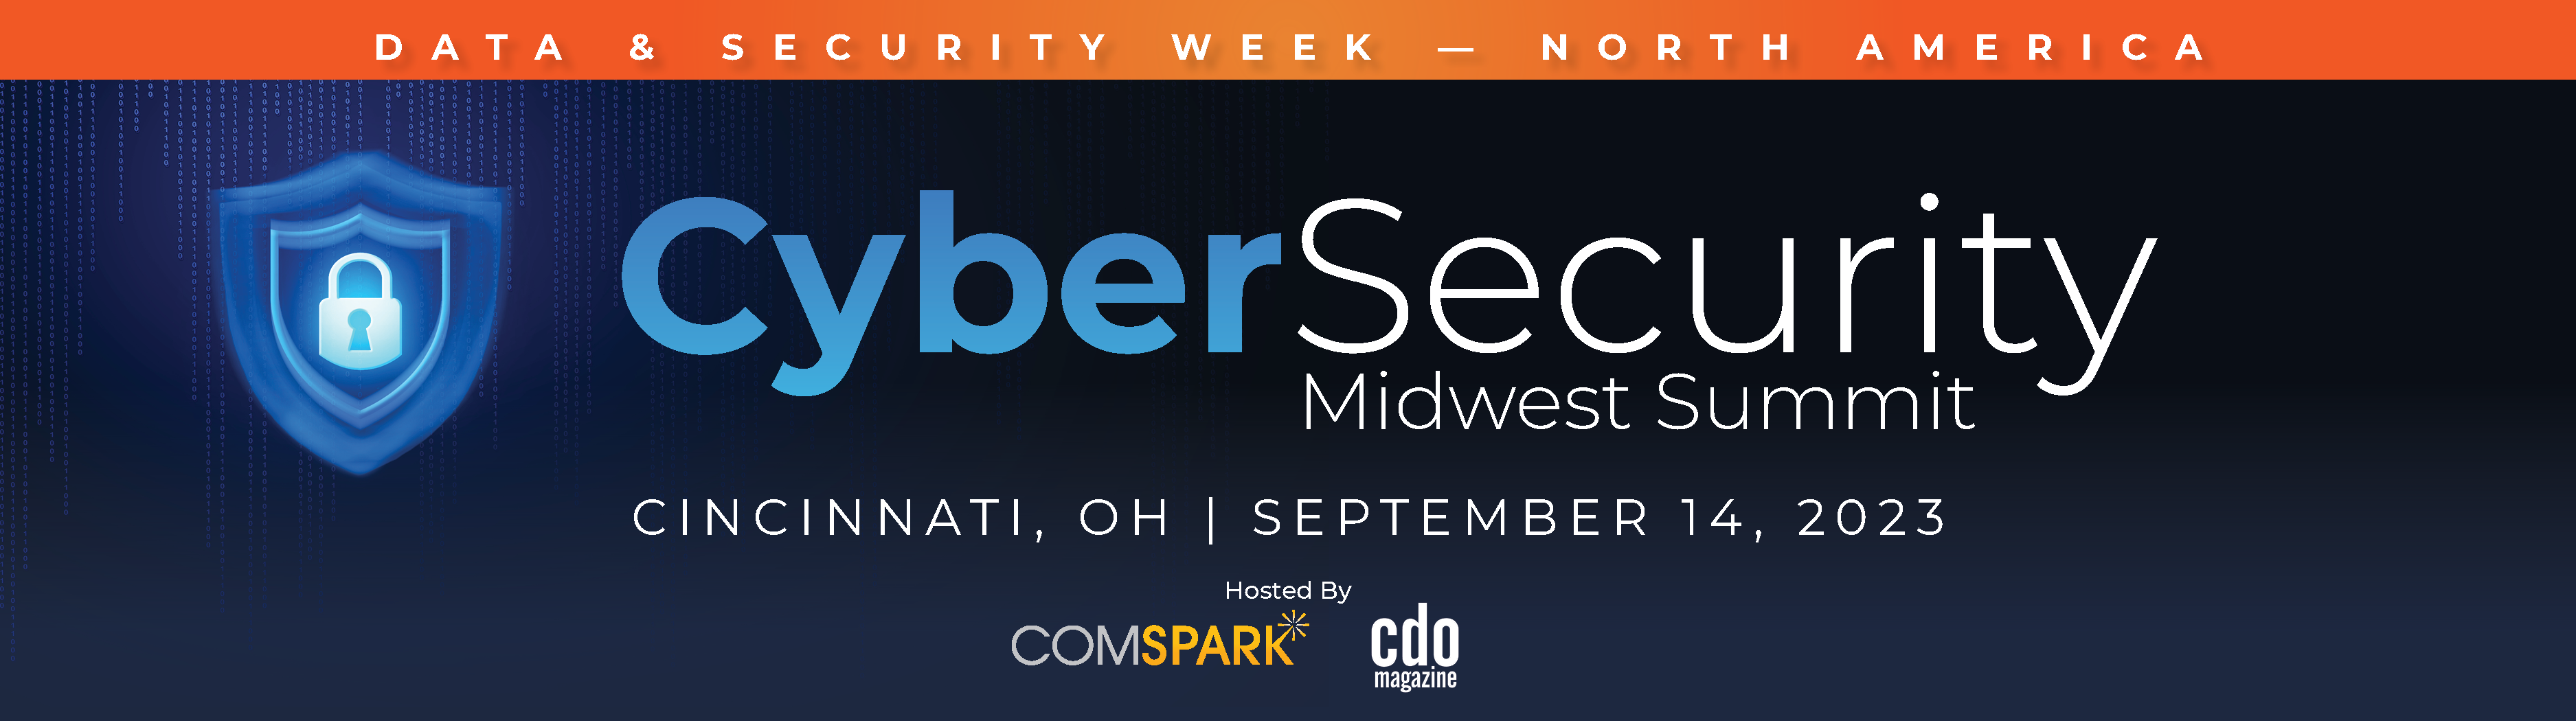 Cybersecurity Midwest Summit (1)